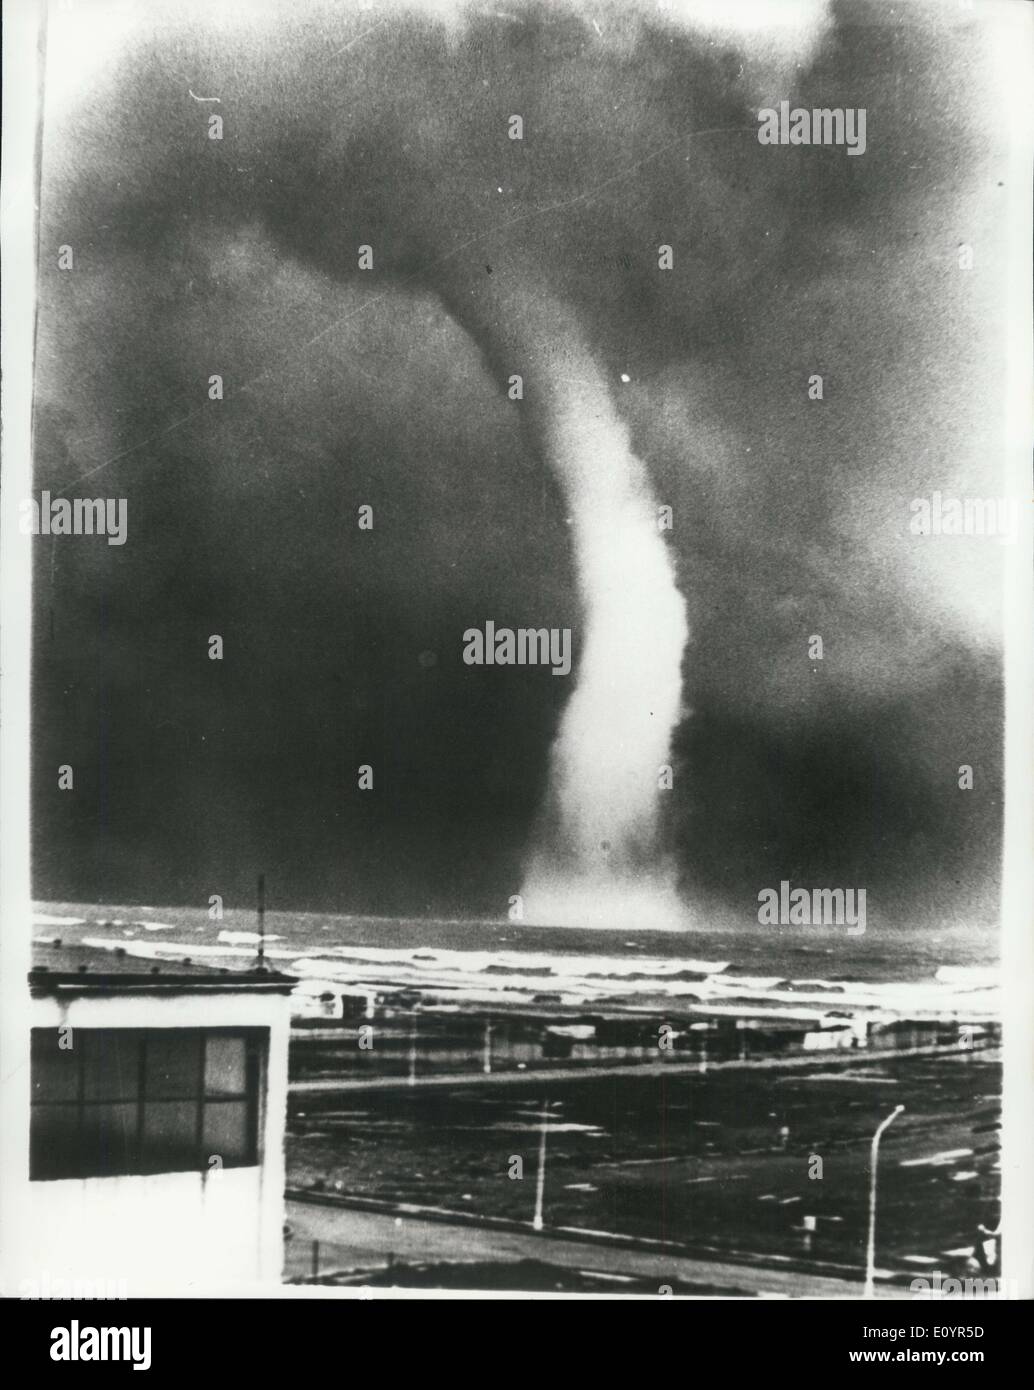 Mar. 15, 1971 - Impressive Picture Of Tornado:  impressive picture of the gigantic tornado of the sea, was taken off the coast of Malaga, Spain. The water reached a height of 500 stres and the photograph was taken by an amateur,  Nubio Crel, of Malaga. Stock Photo